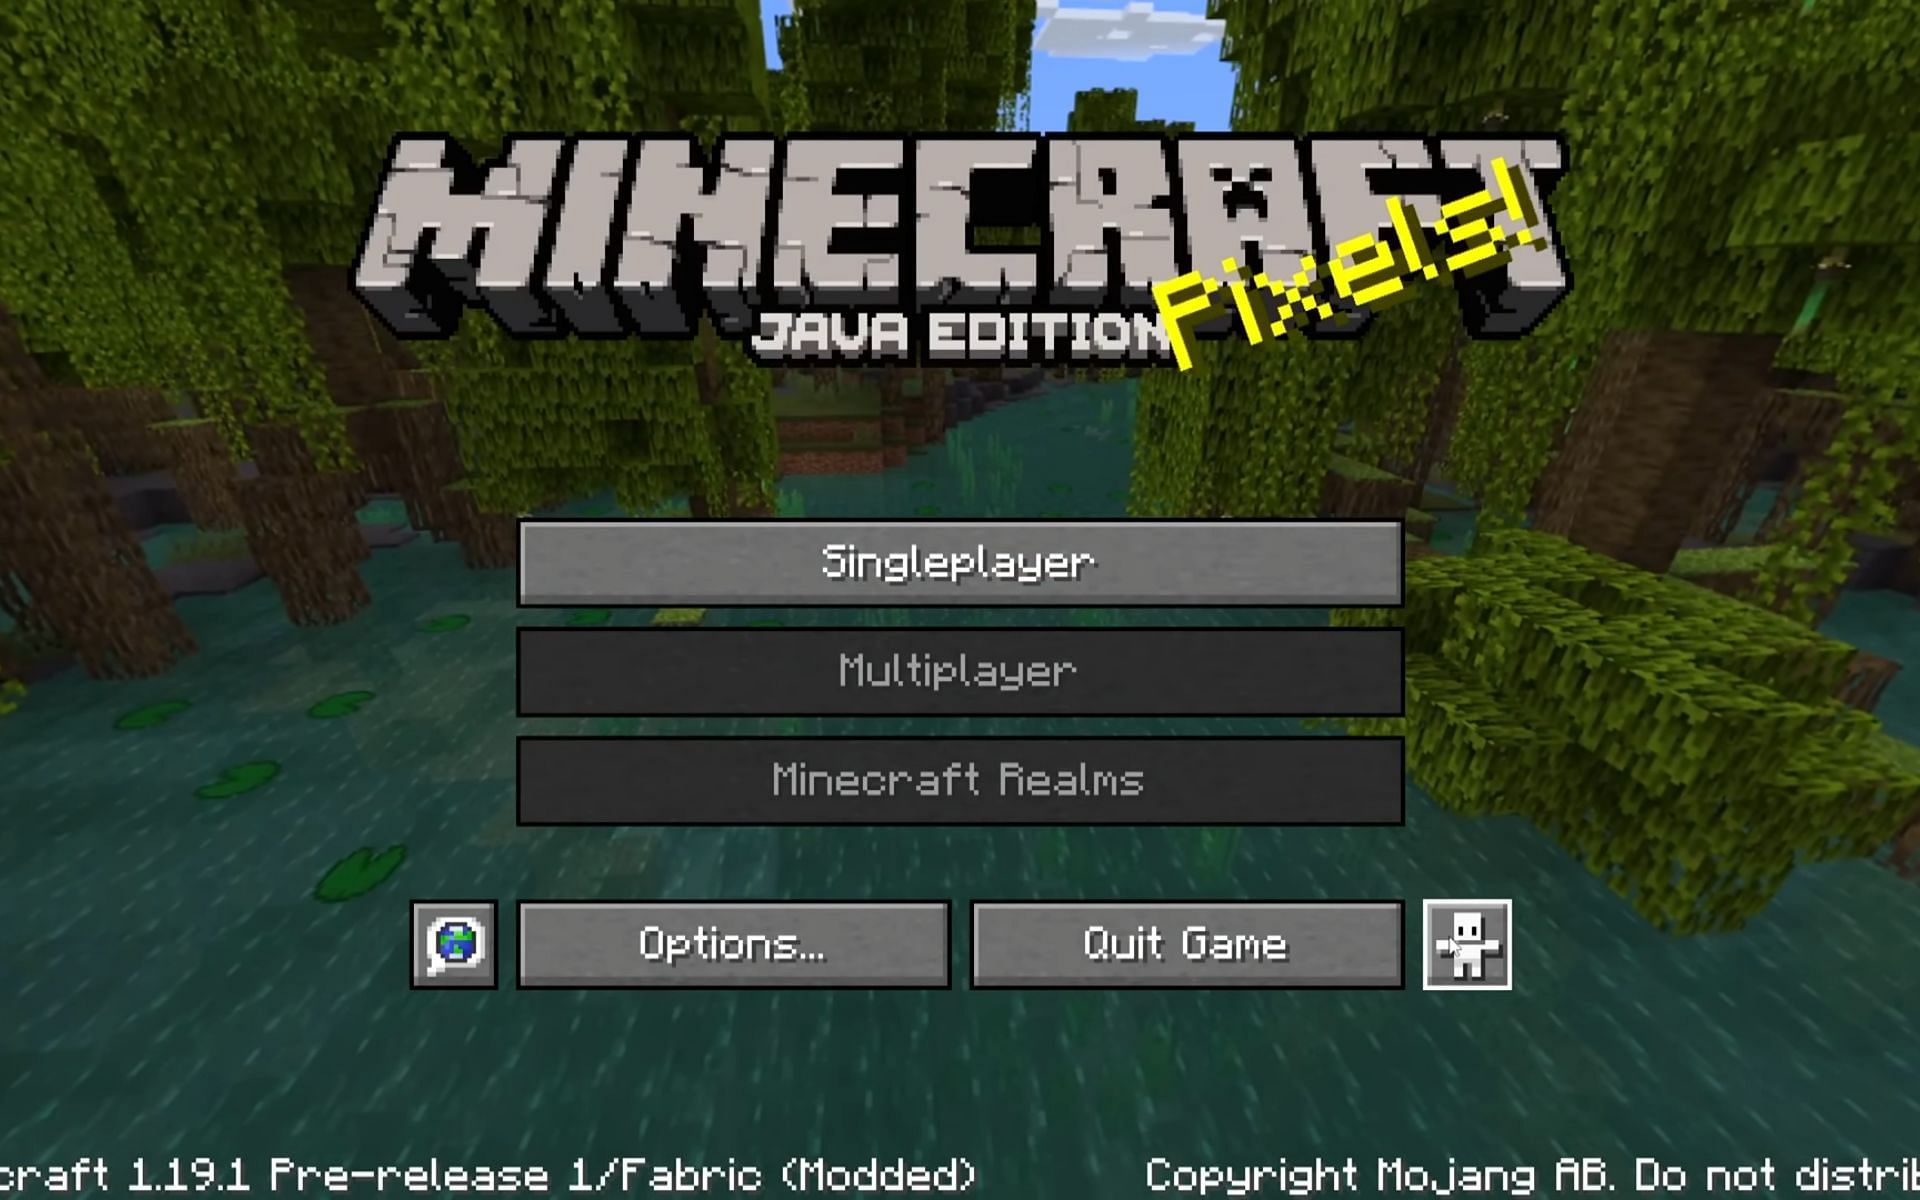 If an account is suspended or banned, players cannot enter multiplayer or realms servers (Image via Minecraft)